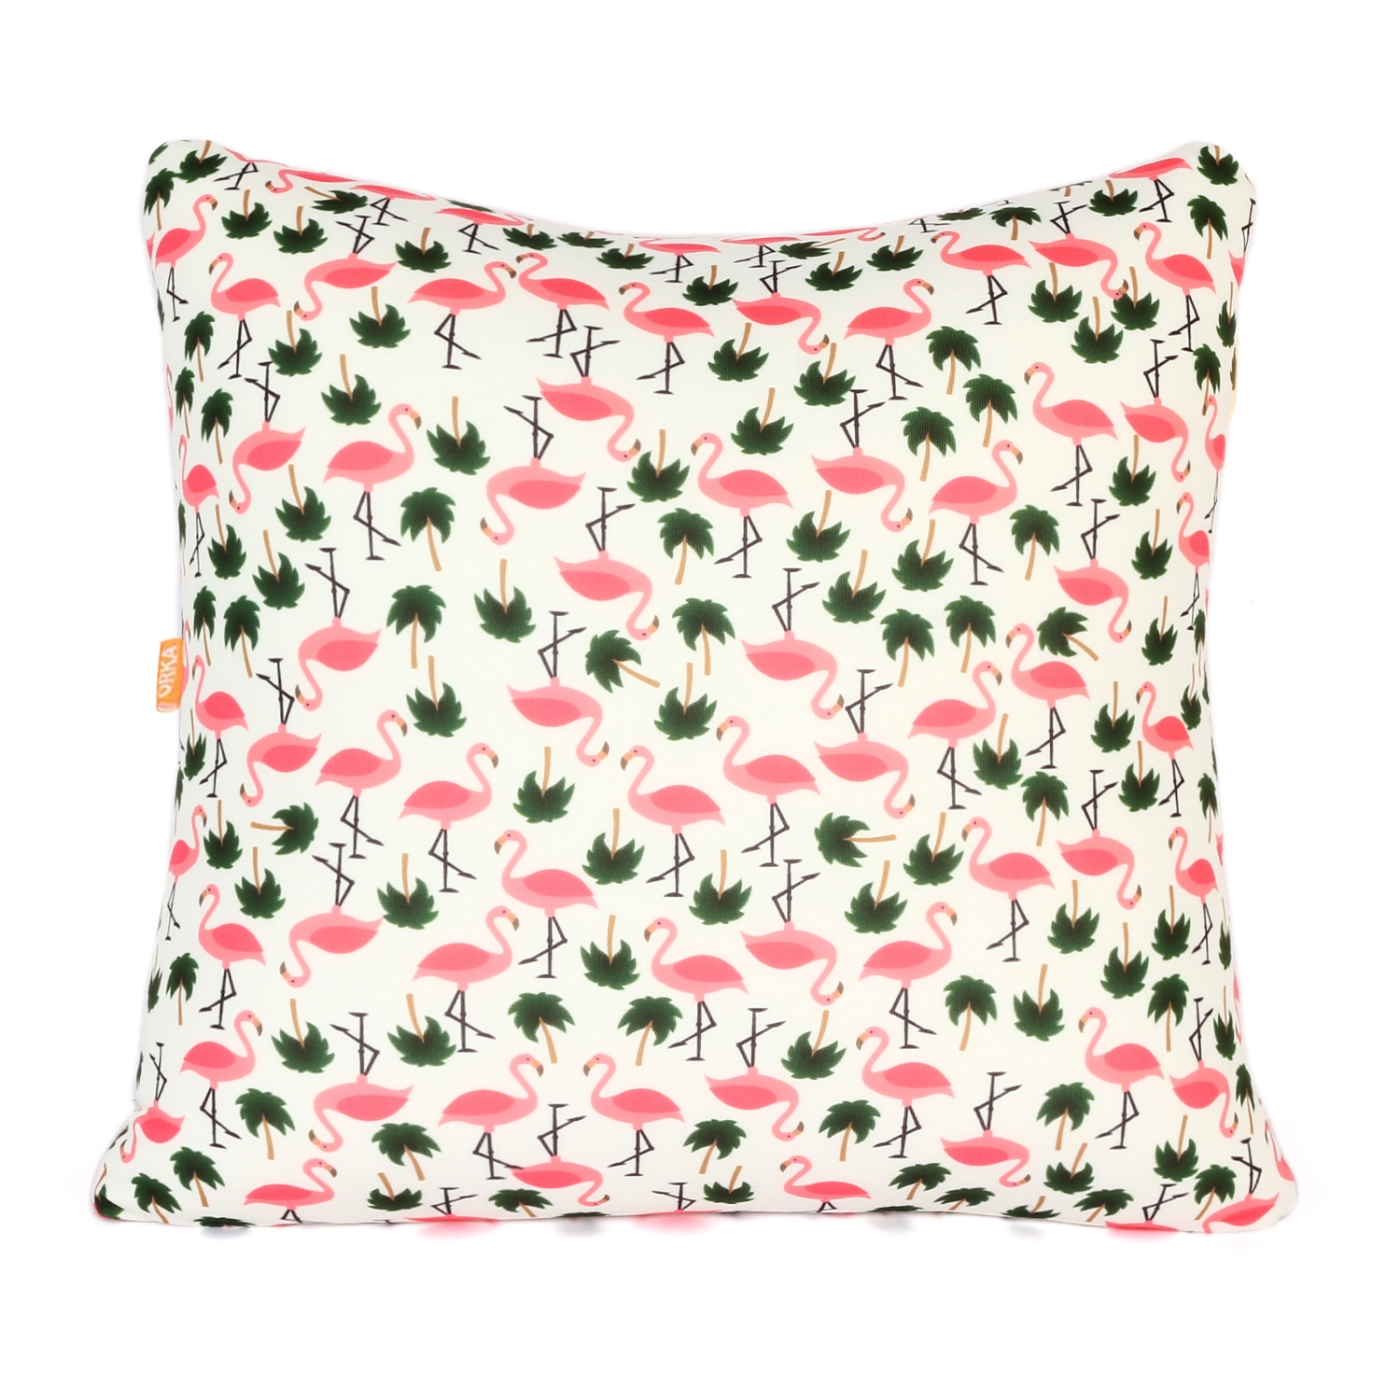 ORKA Digital Printed Spandex Filled With Microbeads Square Cushion 14 X 14 Inch - Pink, Black  